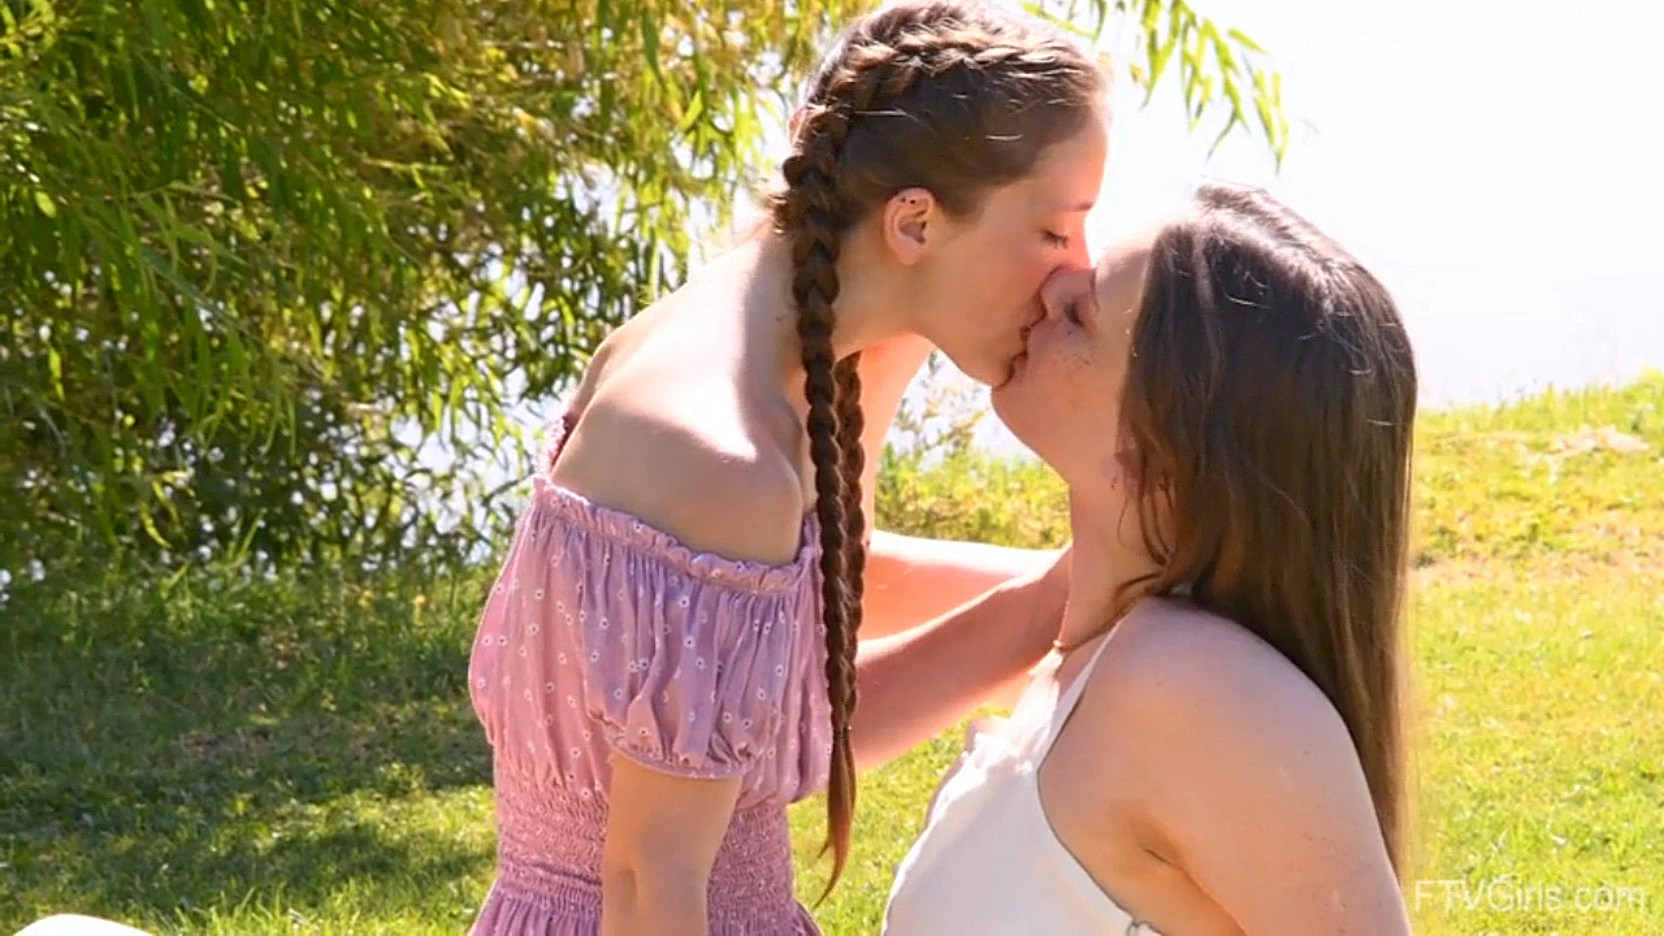 Real-life Lesbians are kissing outdoors